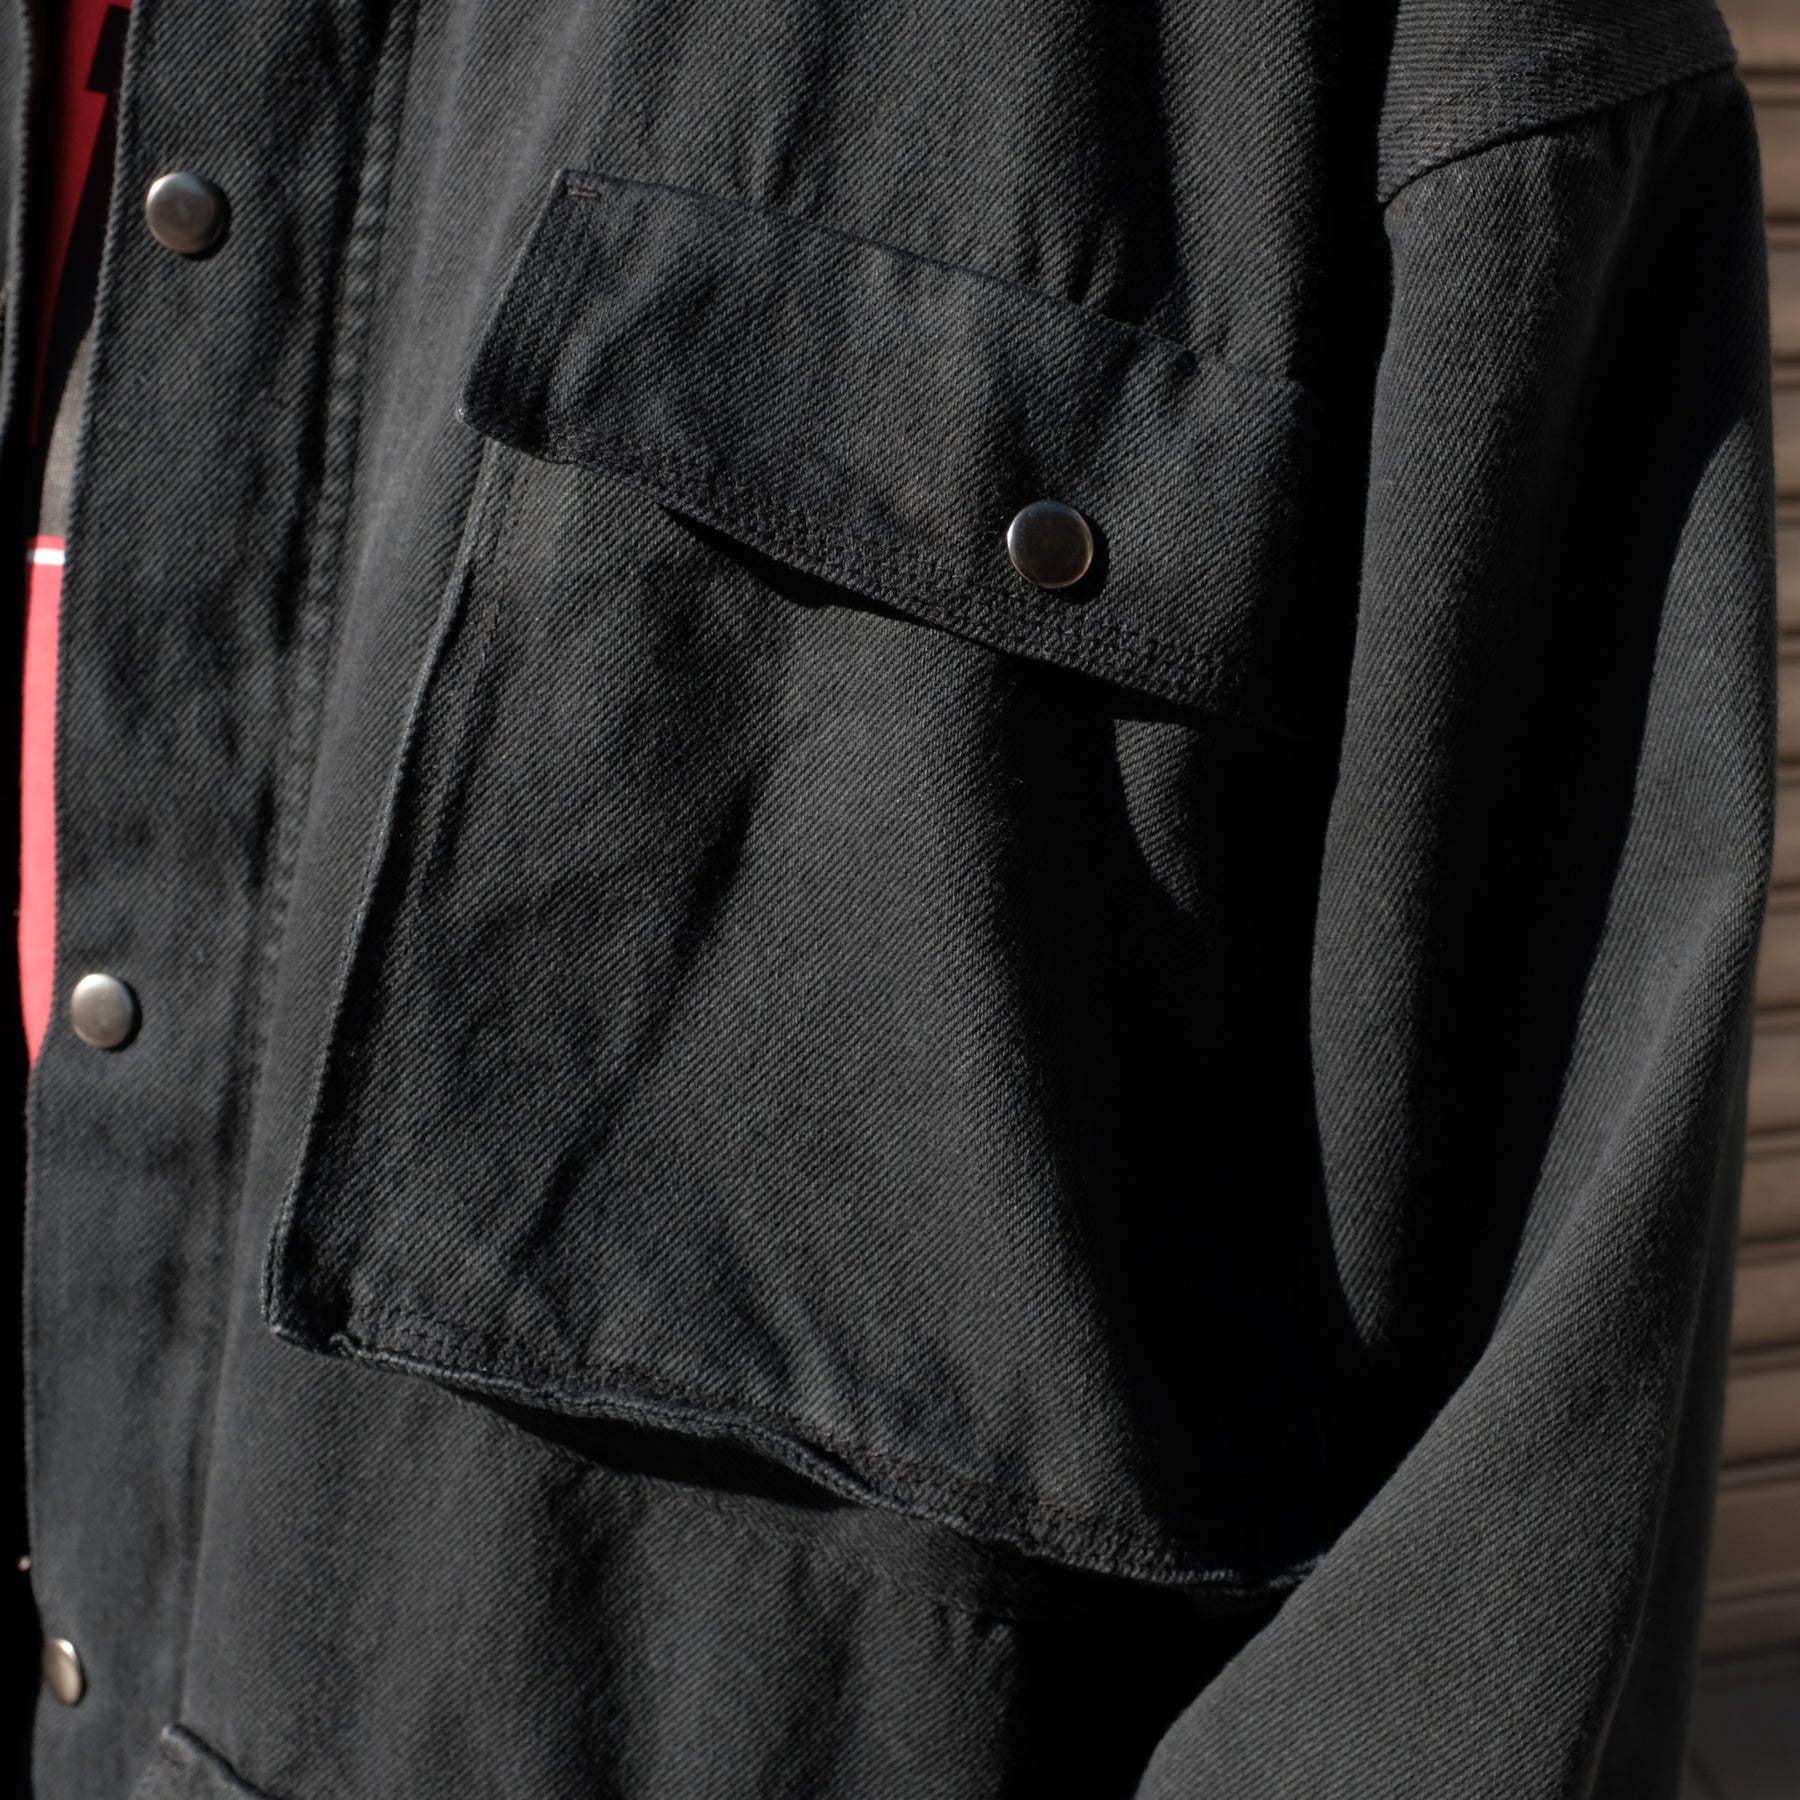 【RESTOCK】WILLY CHAVARRIA / WILLY MONSTER CARGO JACKET WASHED DENIM BLACK